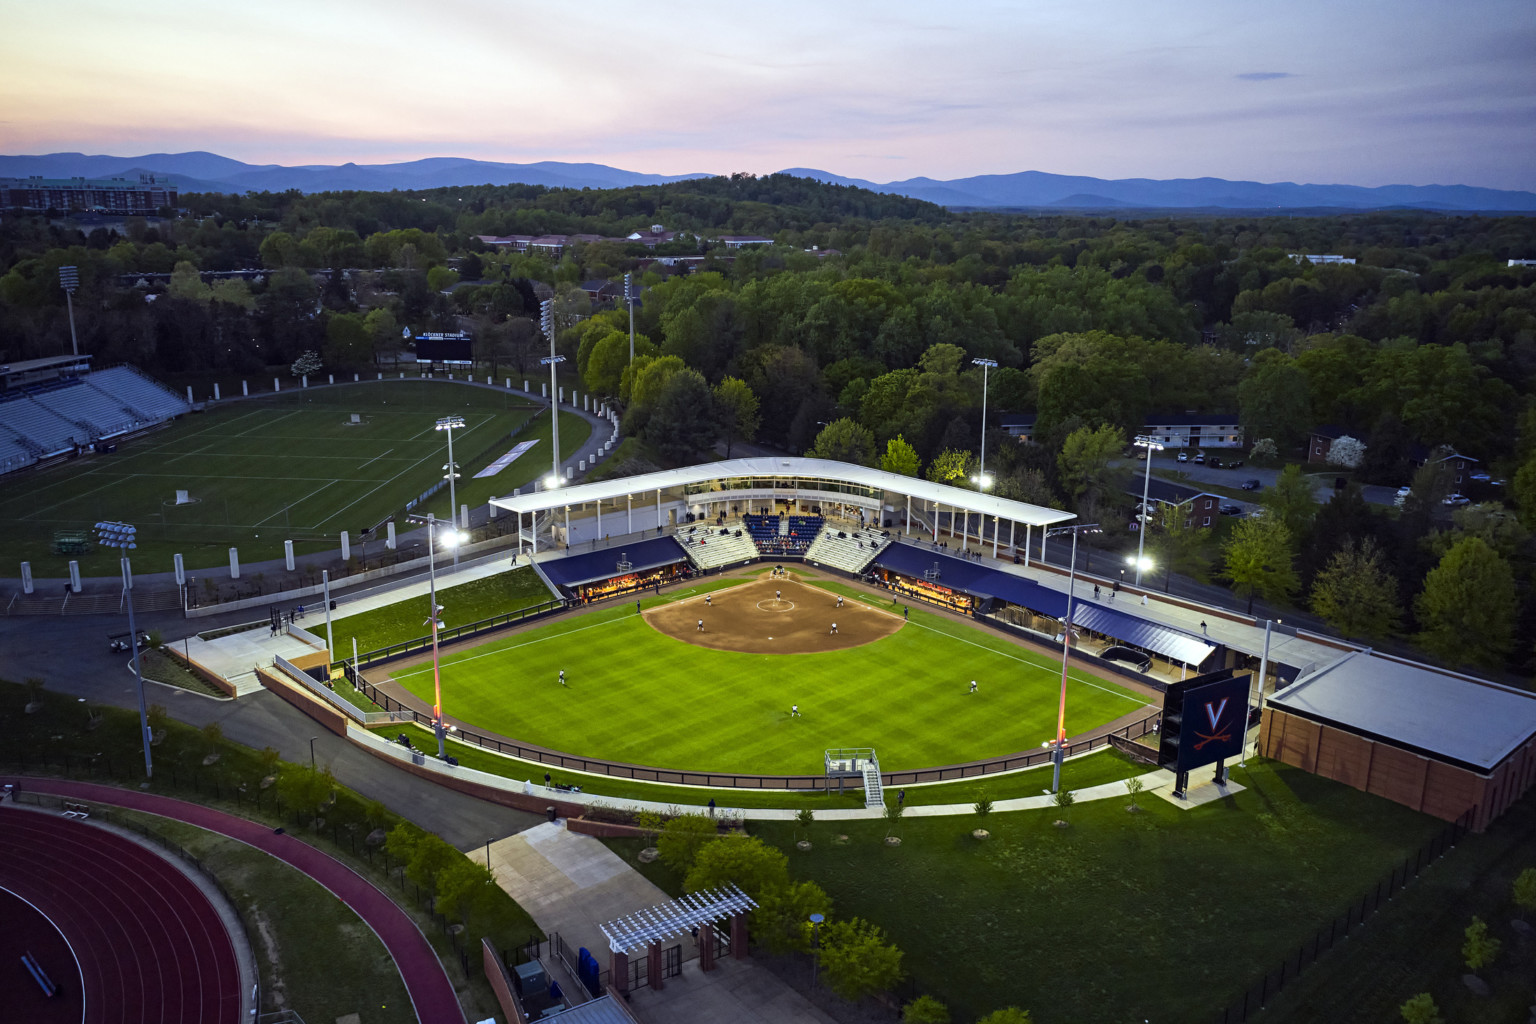 University of Virginia Softball stadium aerial view at lit up at dusk, surrounded by trees and view of Blue Ridge Mountains